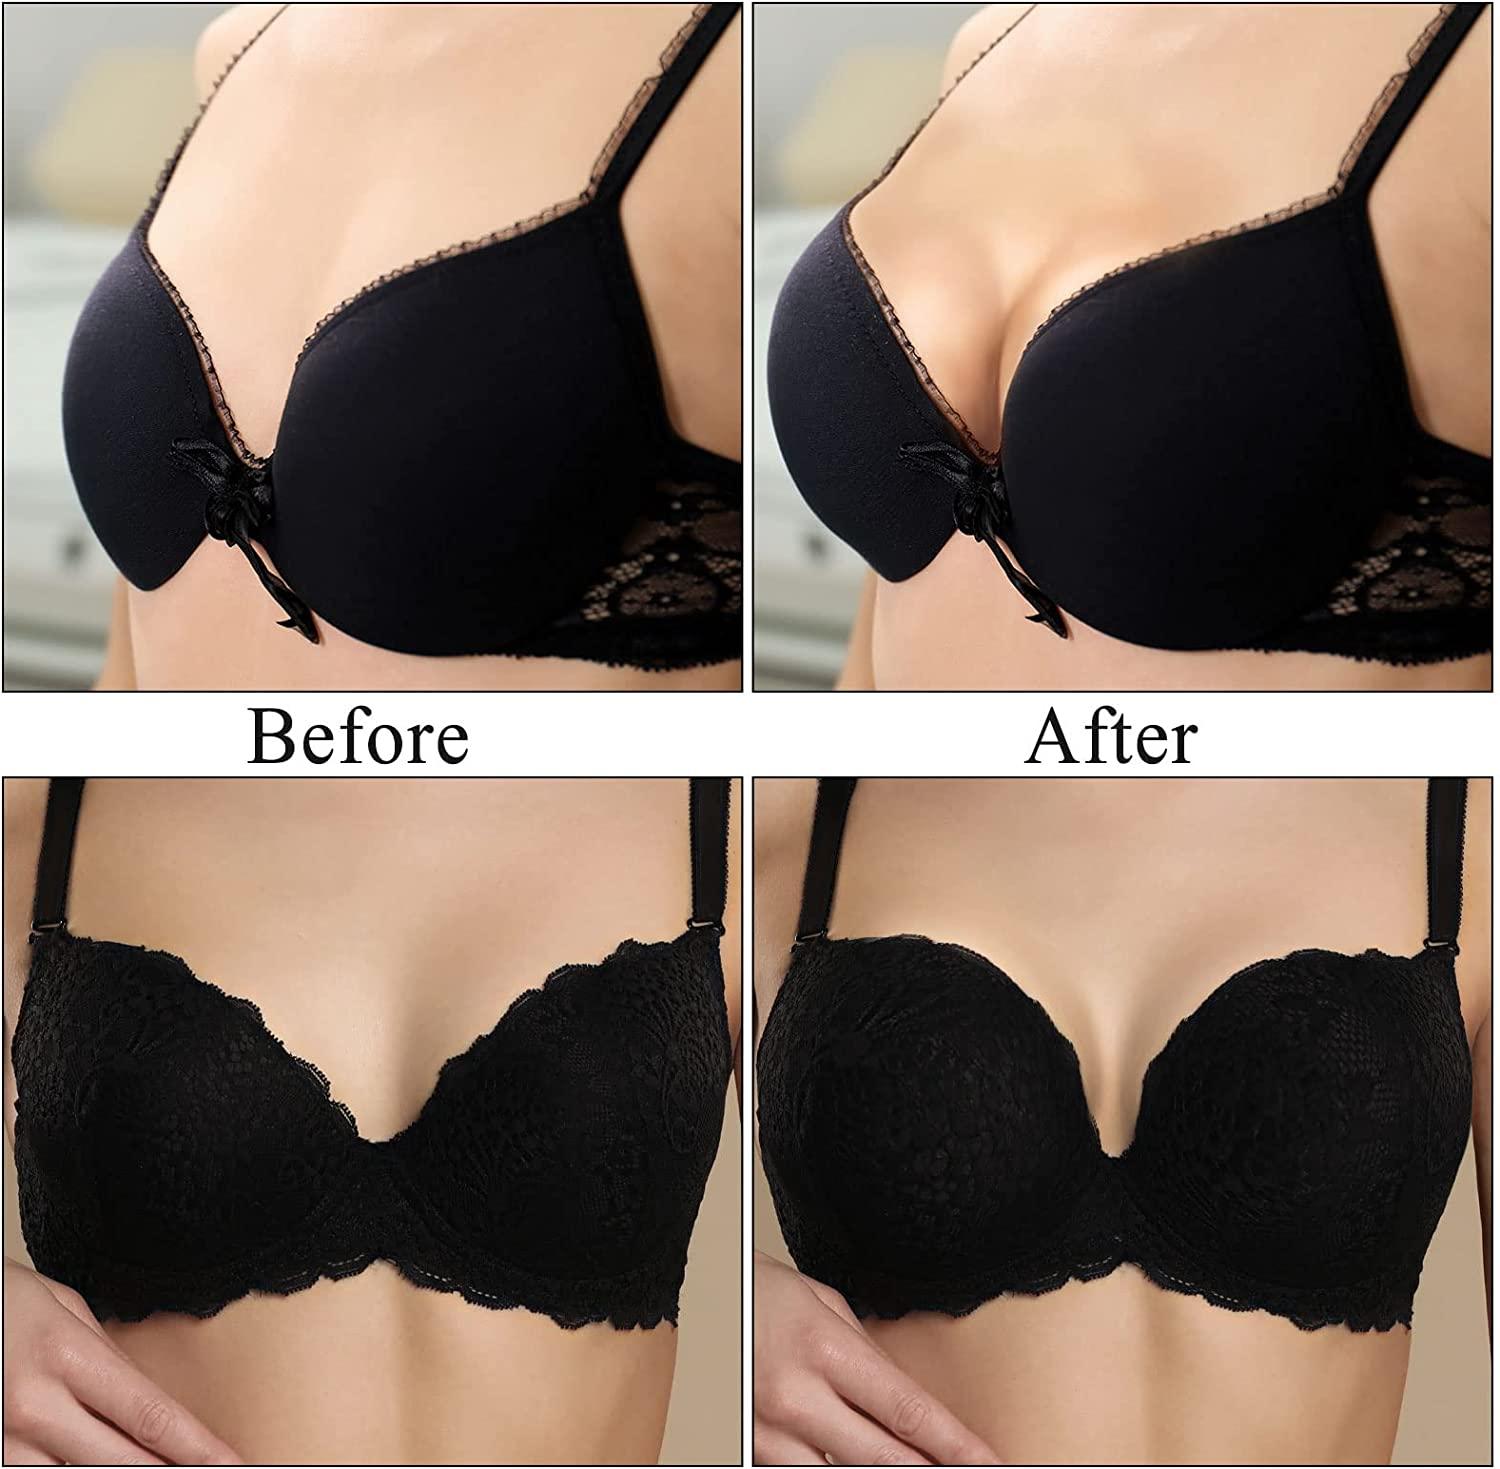 Buy Push Up Bra Pads Insert Breast Enhancer Cups in Sexy Colors +